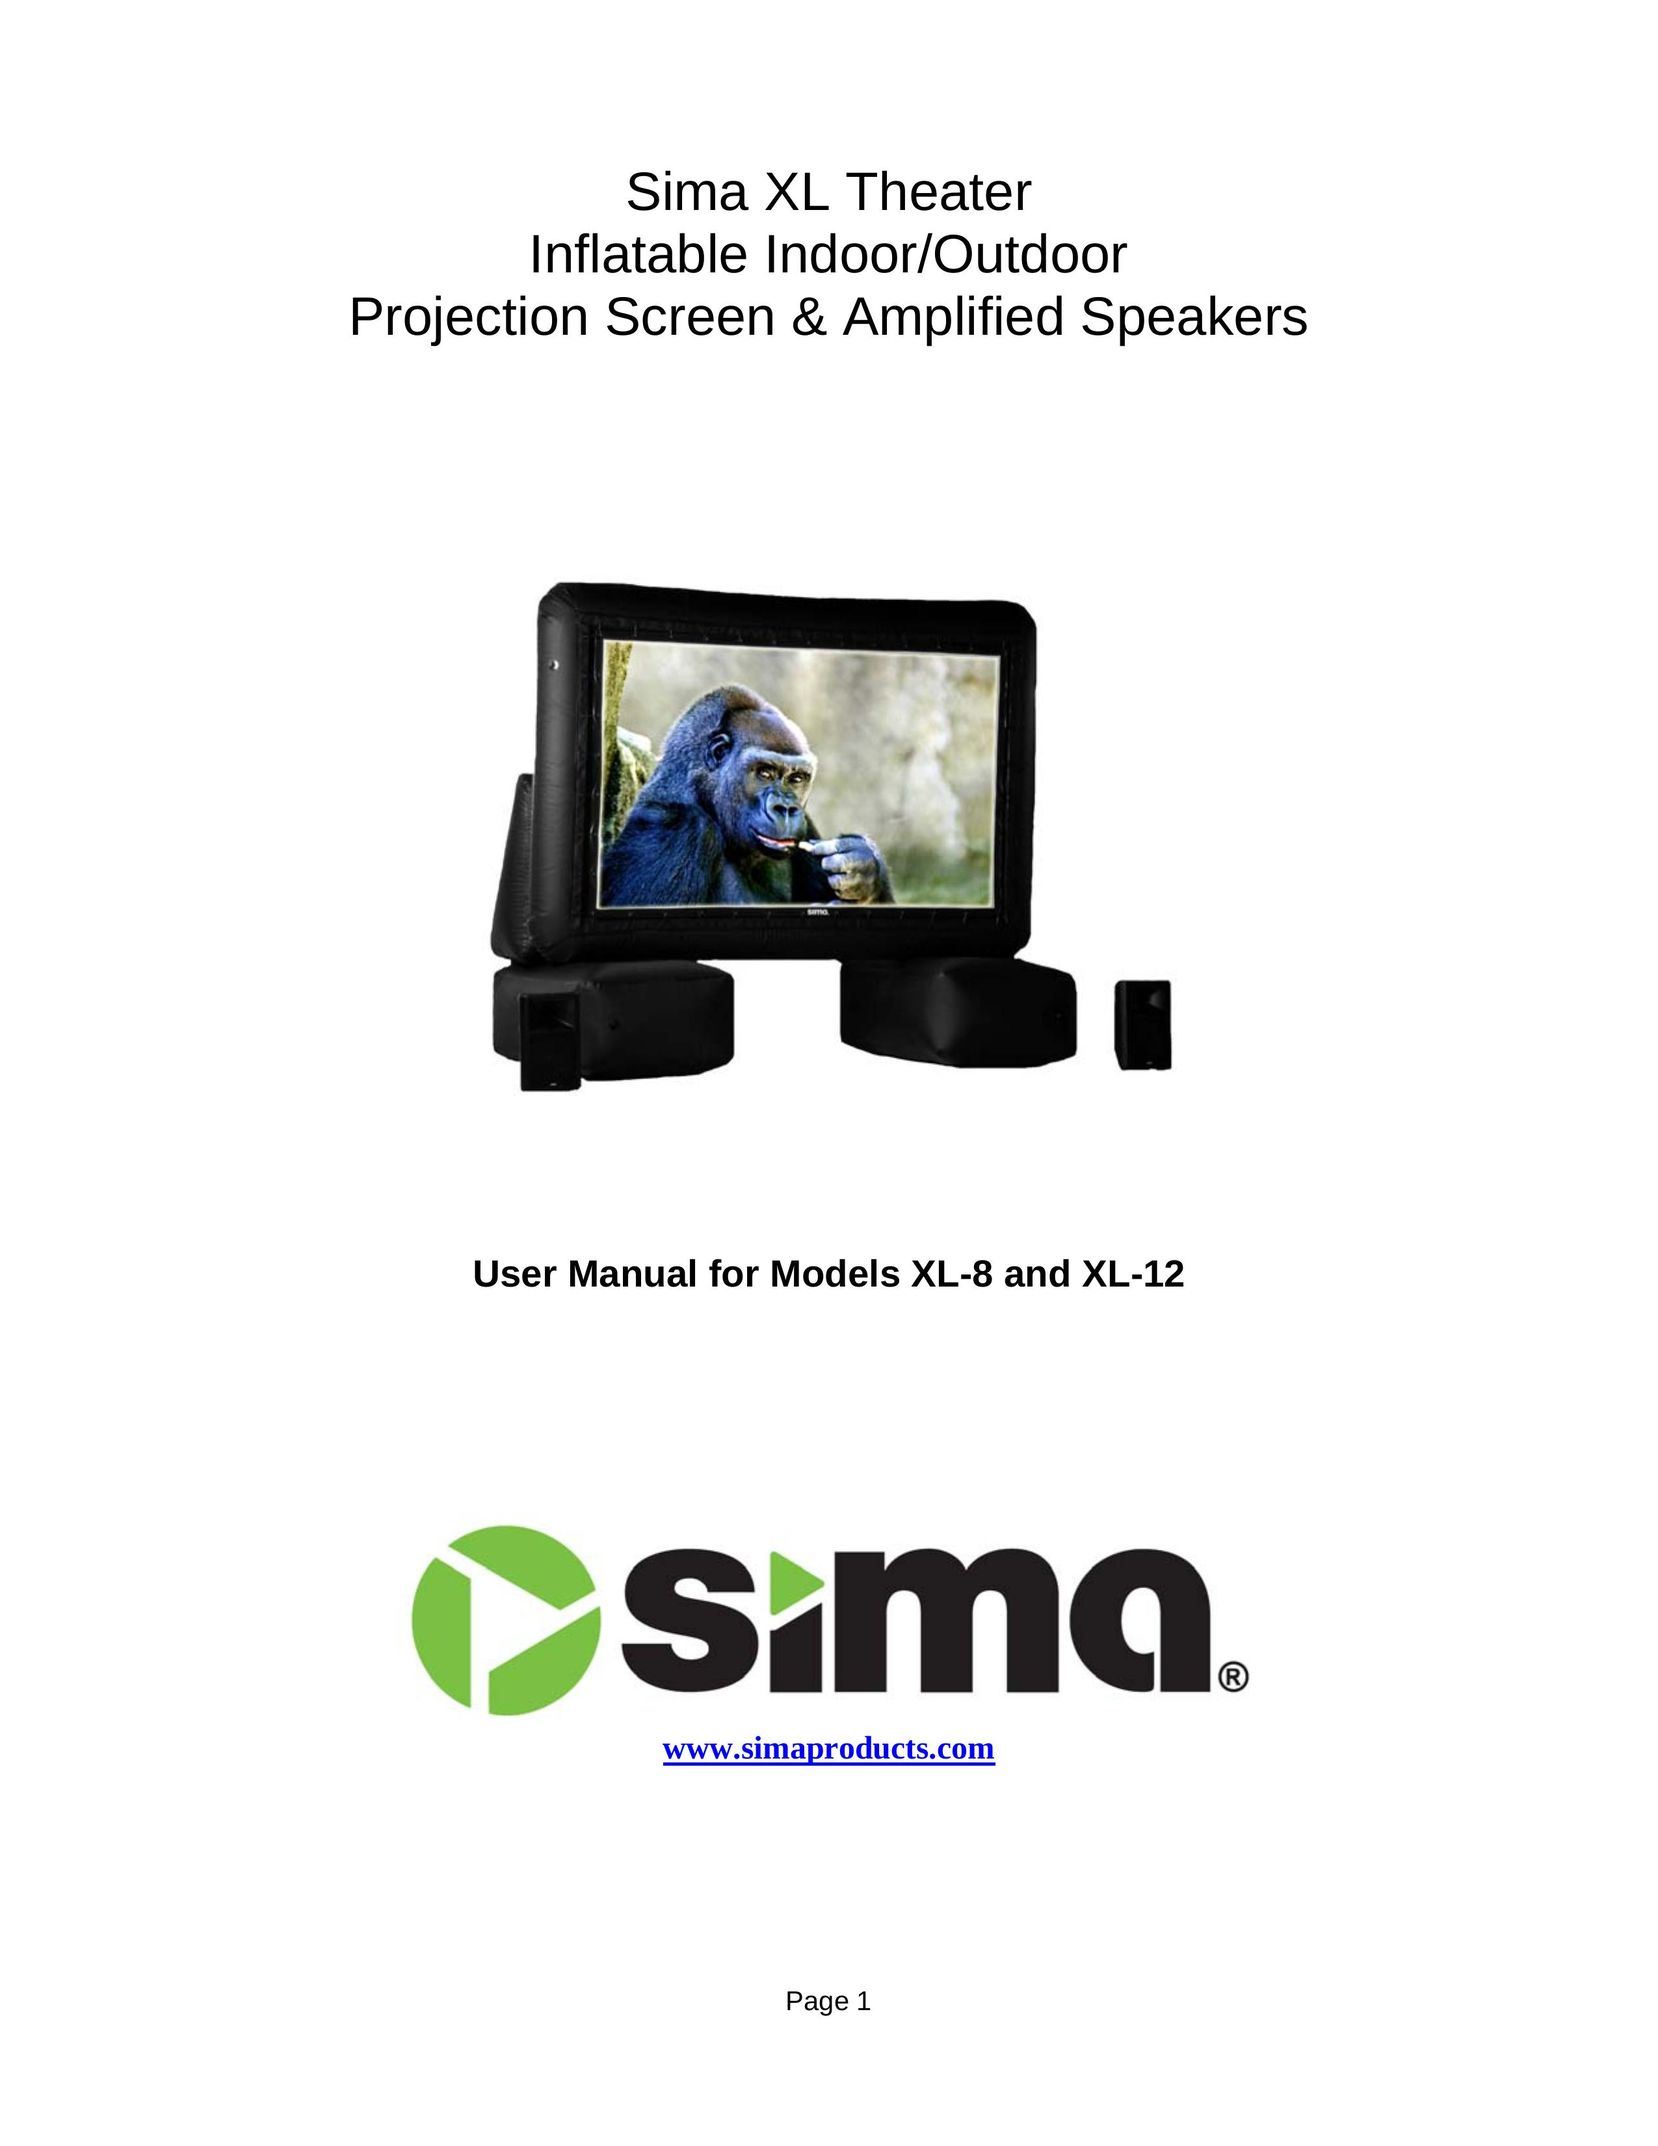 Sima Products XL-12 Home Theater System User Manual